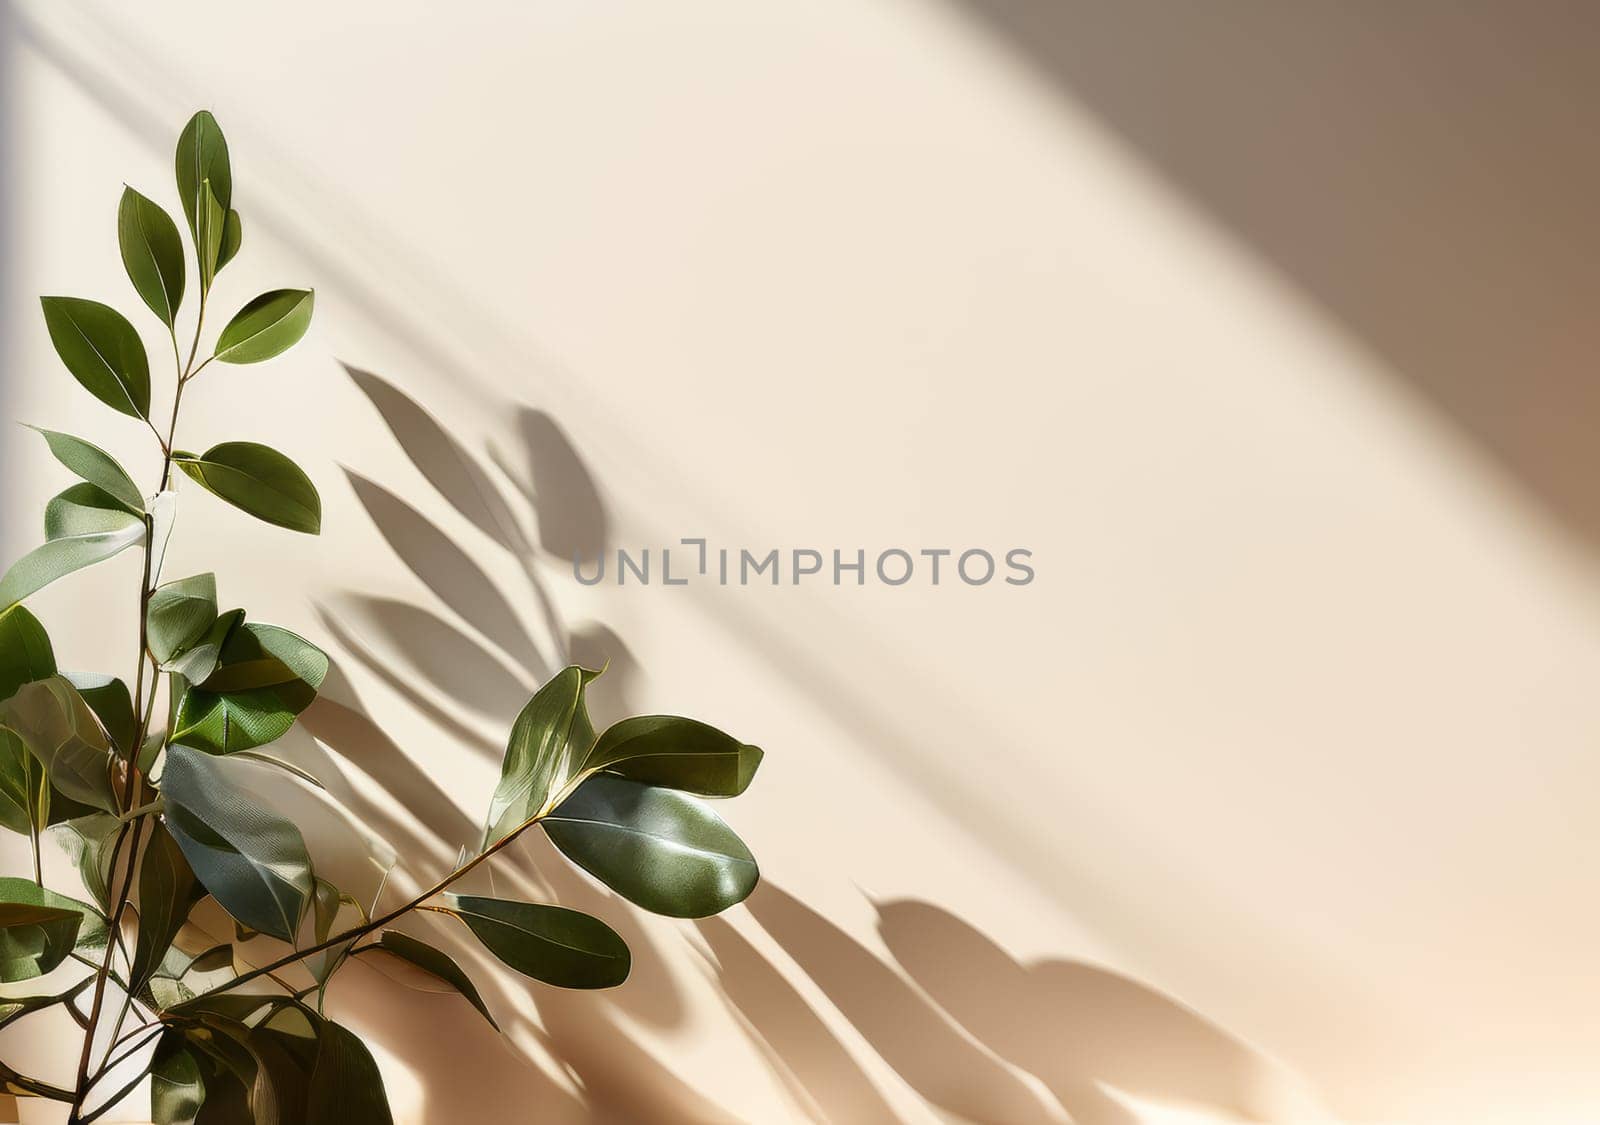 Minimalistic abstract gentle light beige wall background for product presentation or social media stories backdrop template. Green leaves aesthetic with beautiful light and intricate shadow.